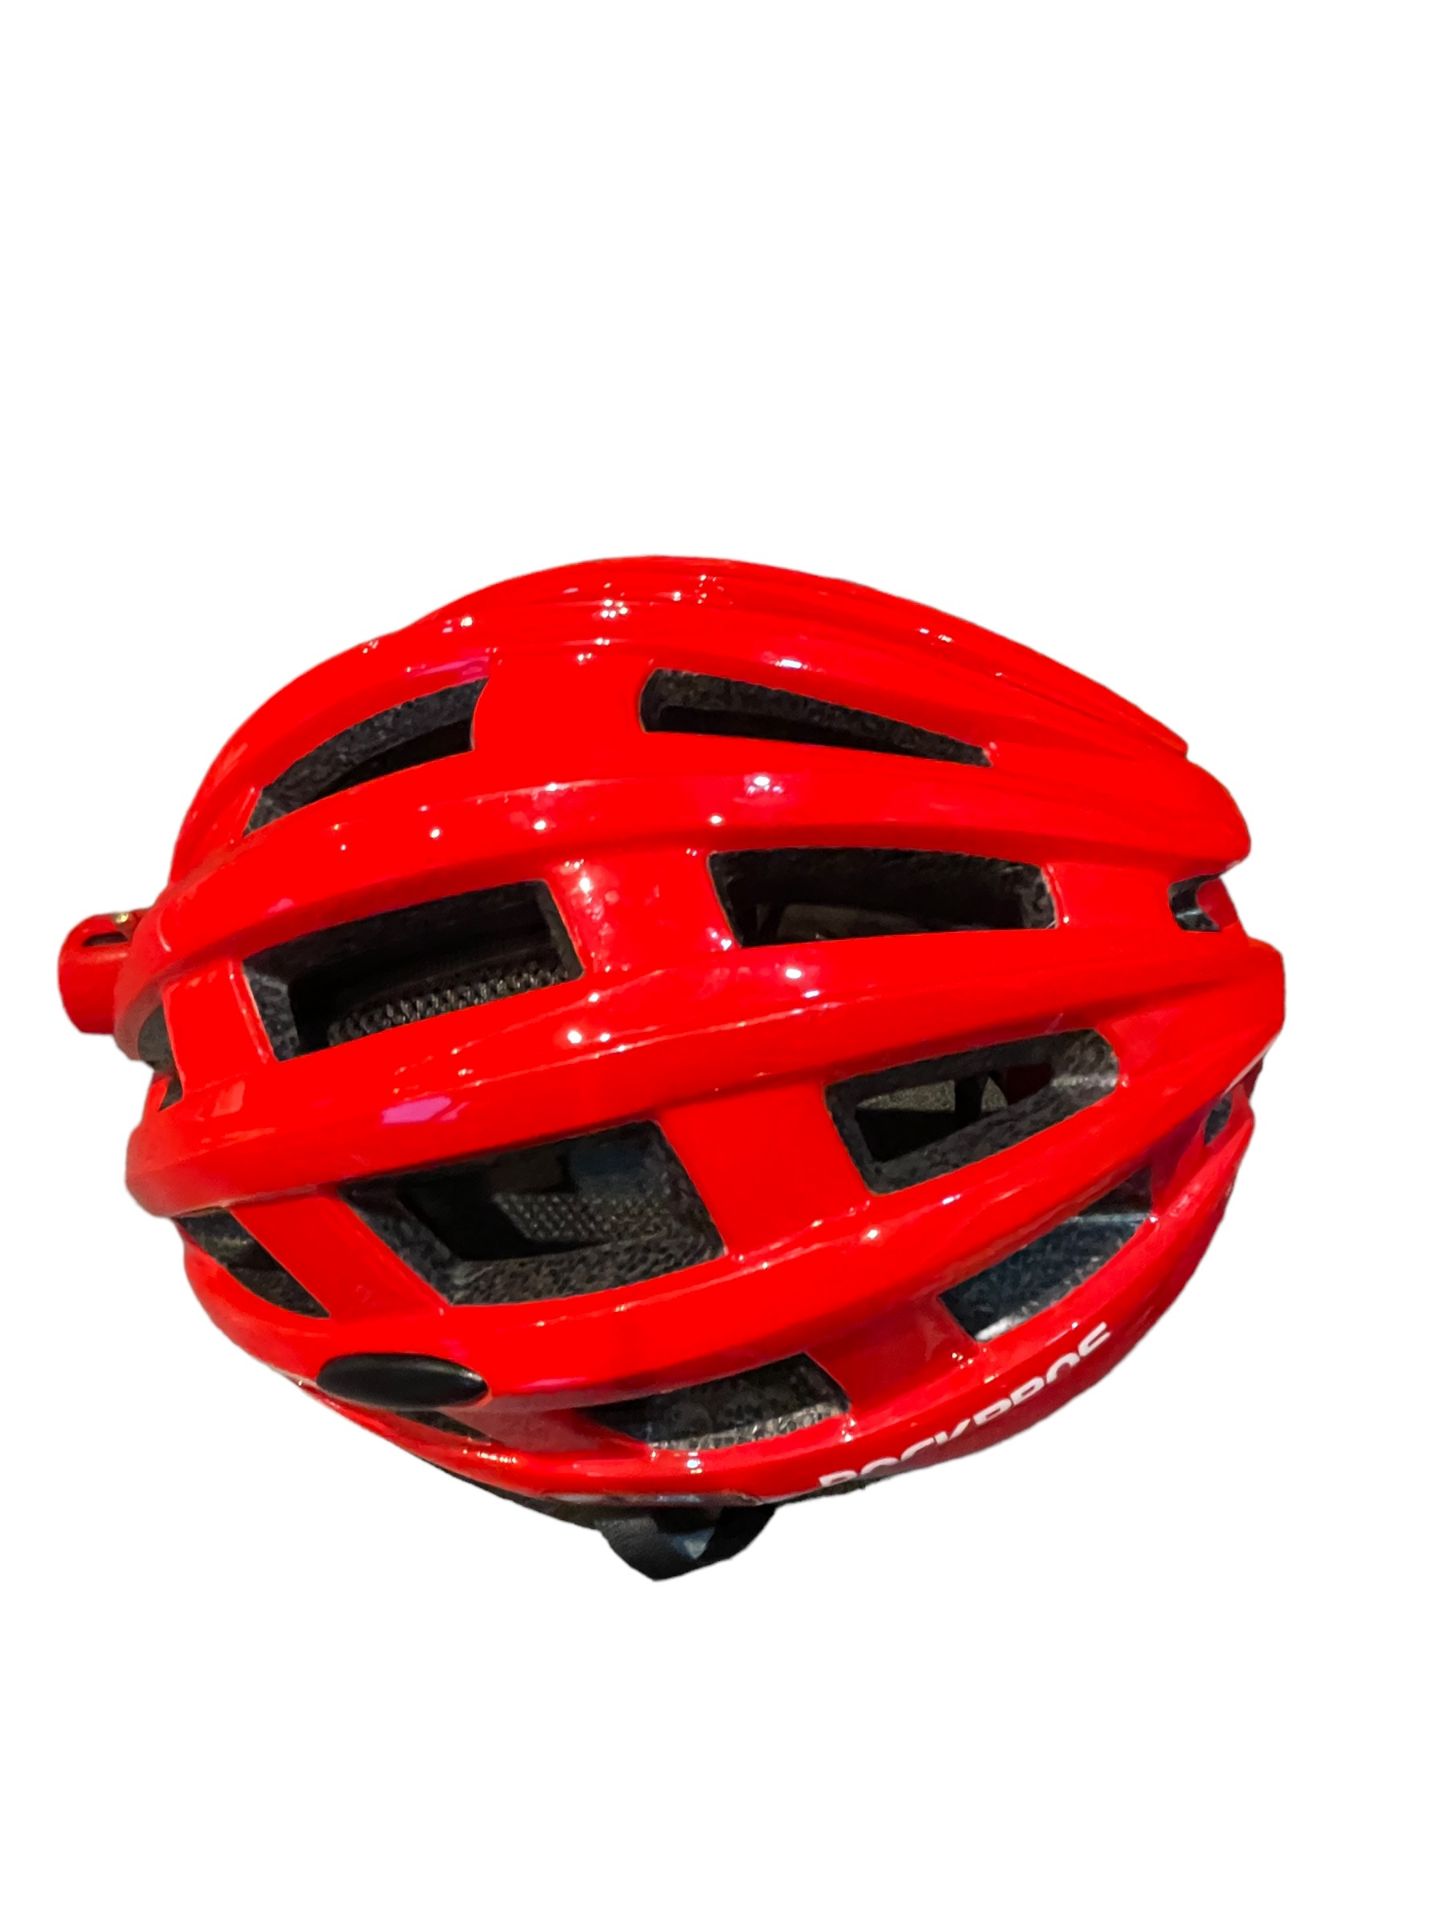 Rock Bros Cycling Helmet fully working boxed demo - Image 6 of 8